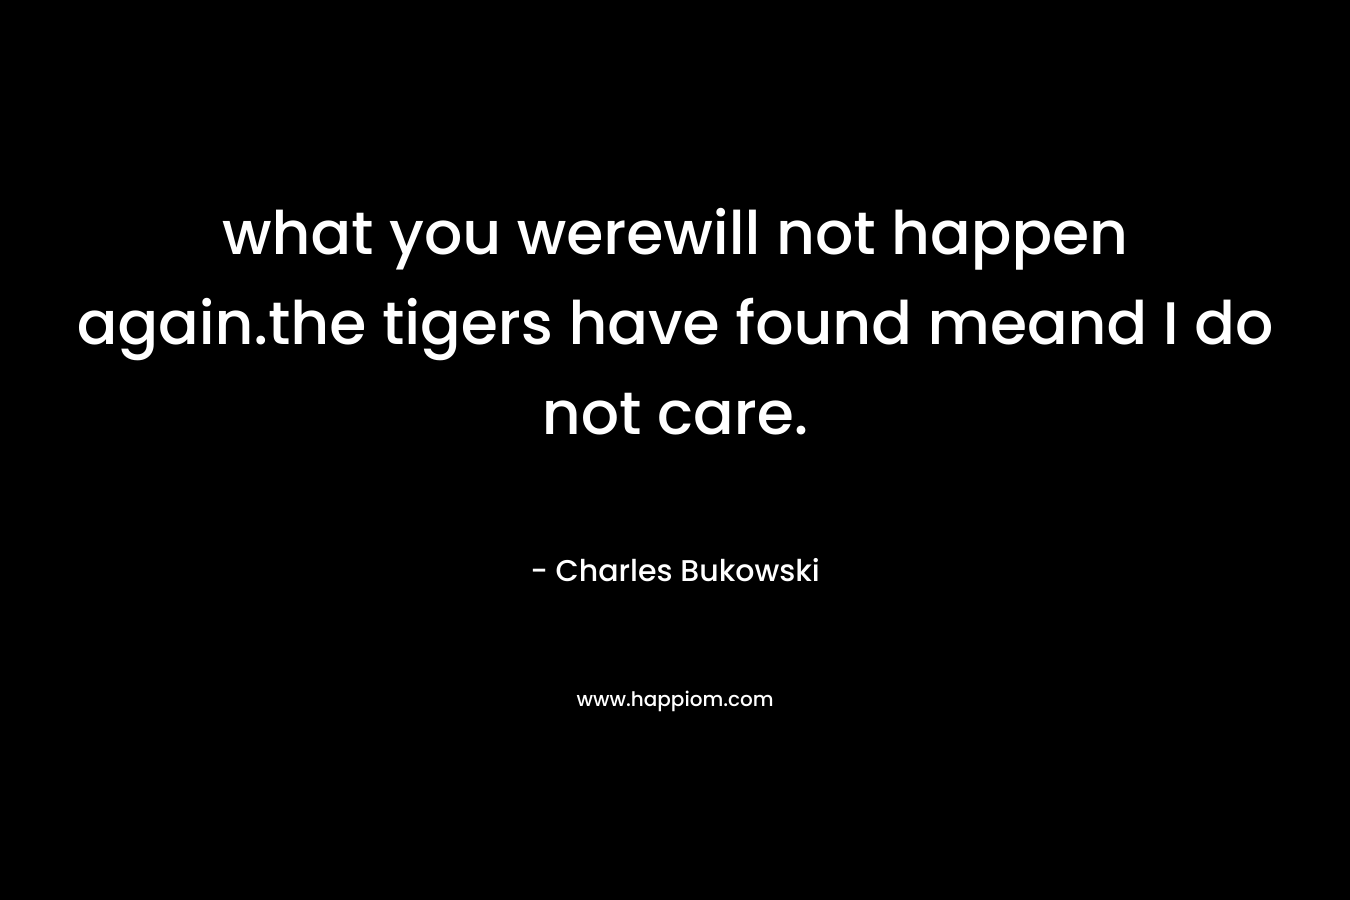 what you werewill not happen again.the tigers have found meand I do not care. – Charles Bukowski